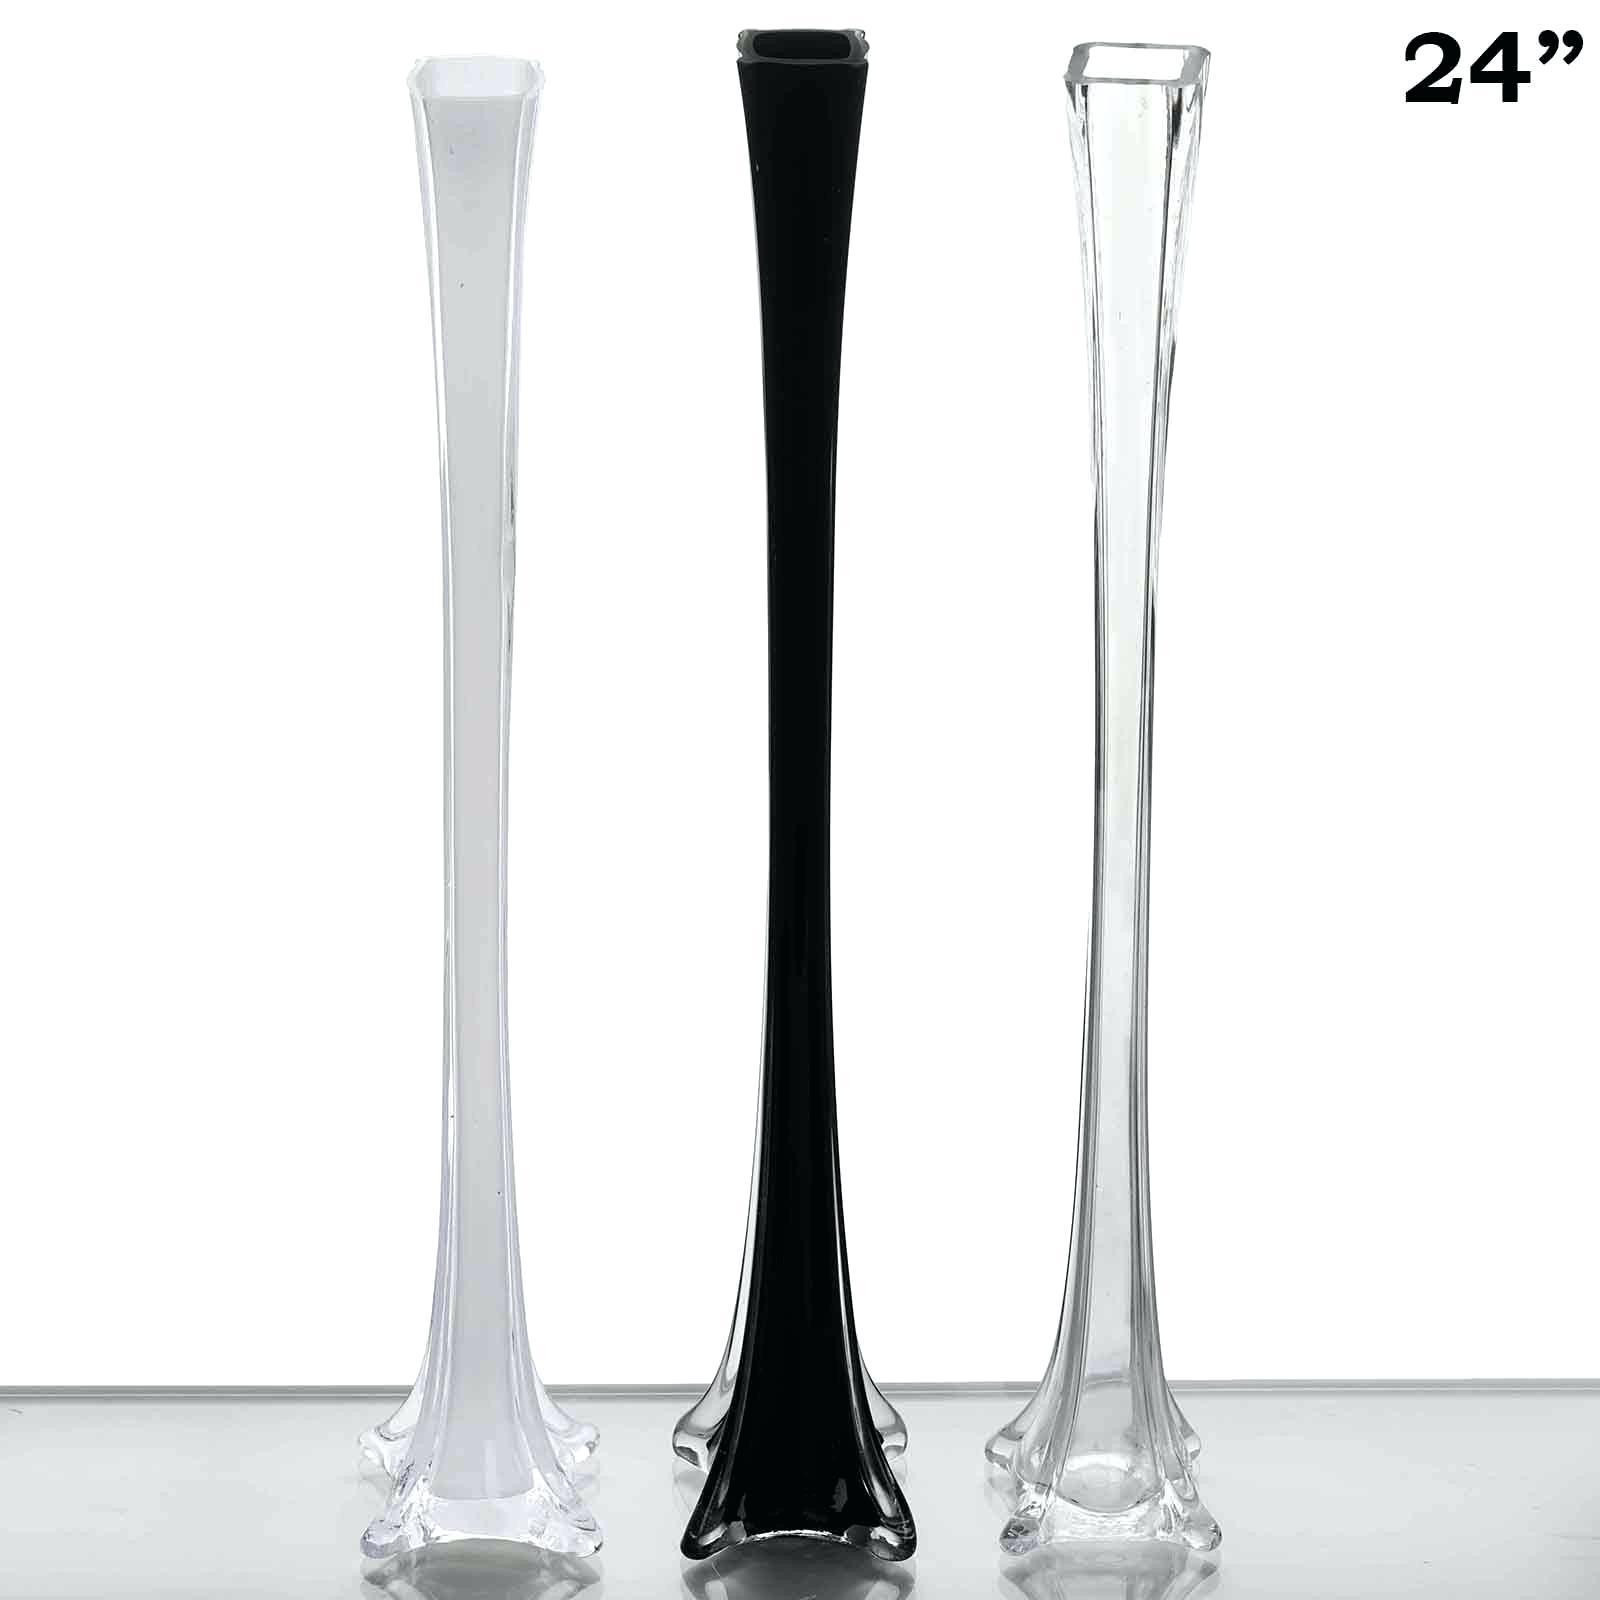 22 attractive Long Glass Vase 2024 free download long glass vase of fantastic chair decor ideas from living room vases wholesale awesome in fantastic chair decor ideas from living room vases wholesale awesome cheap glass vases 1h vasesi 0d